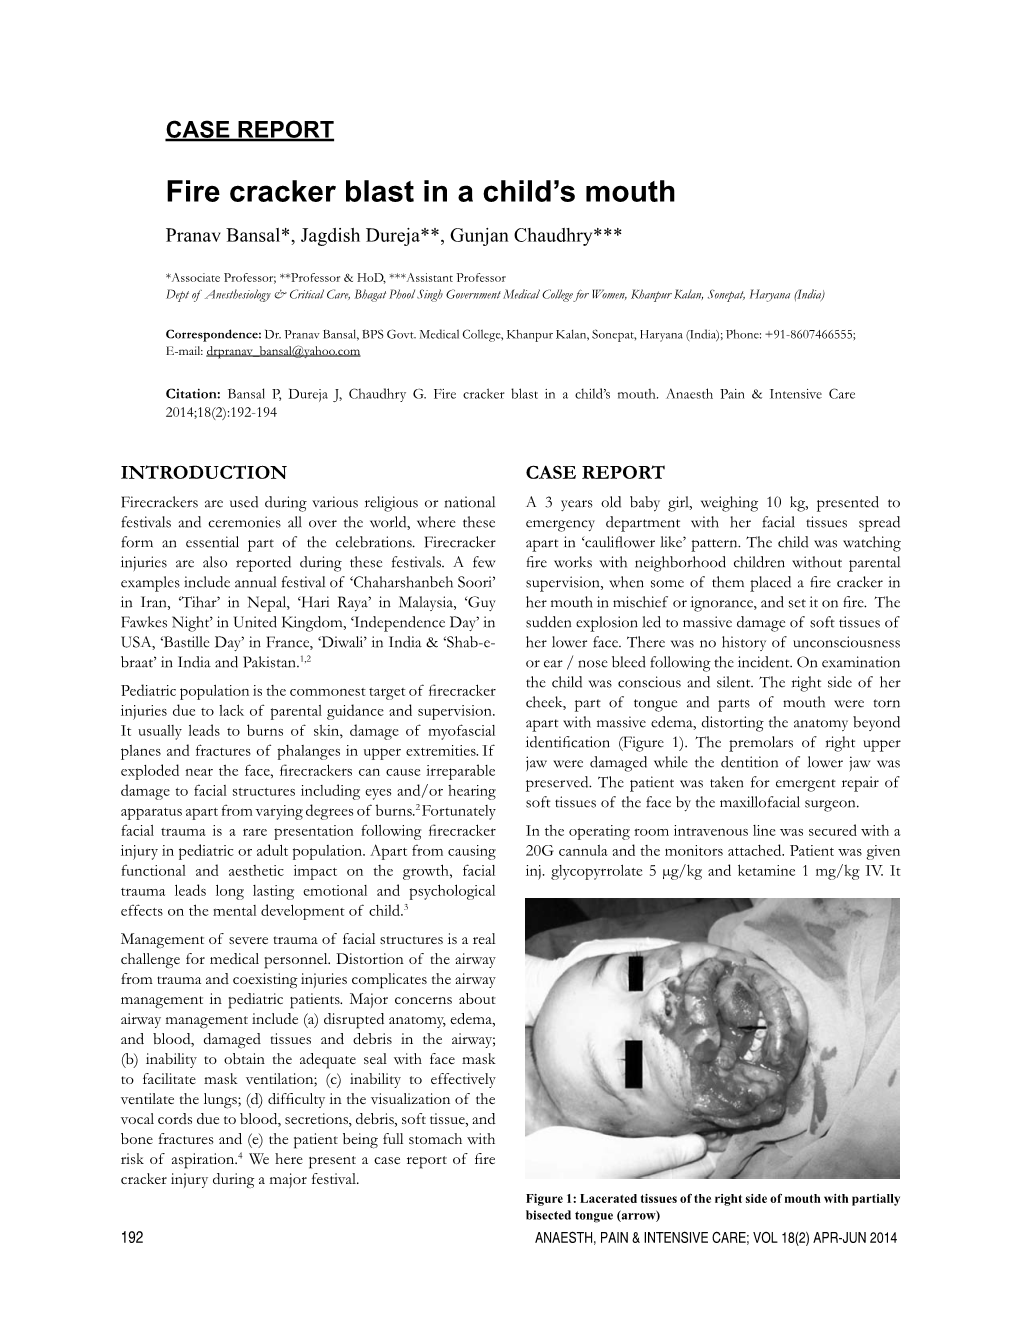 Fire Cracker Blast in a Child's Mouth